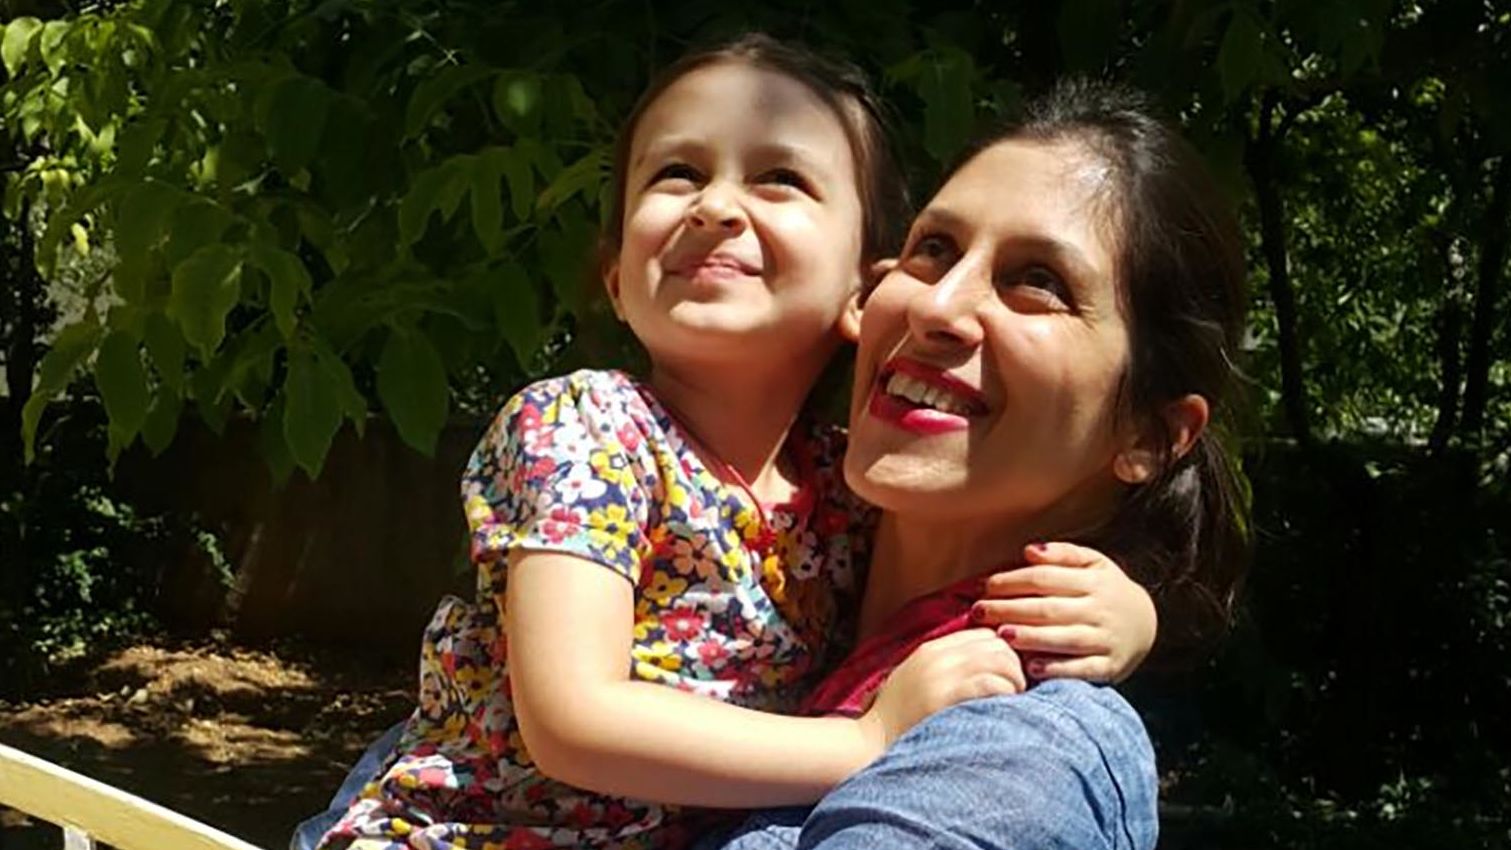 Nazanin took the decision to go on hunger strike after her daughter Gabriella turned five while she remains incarcerated in Iran.